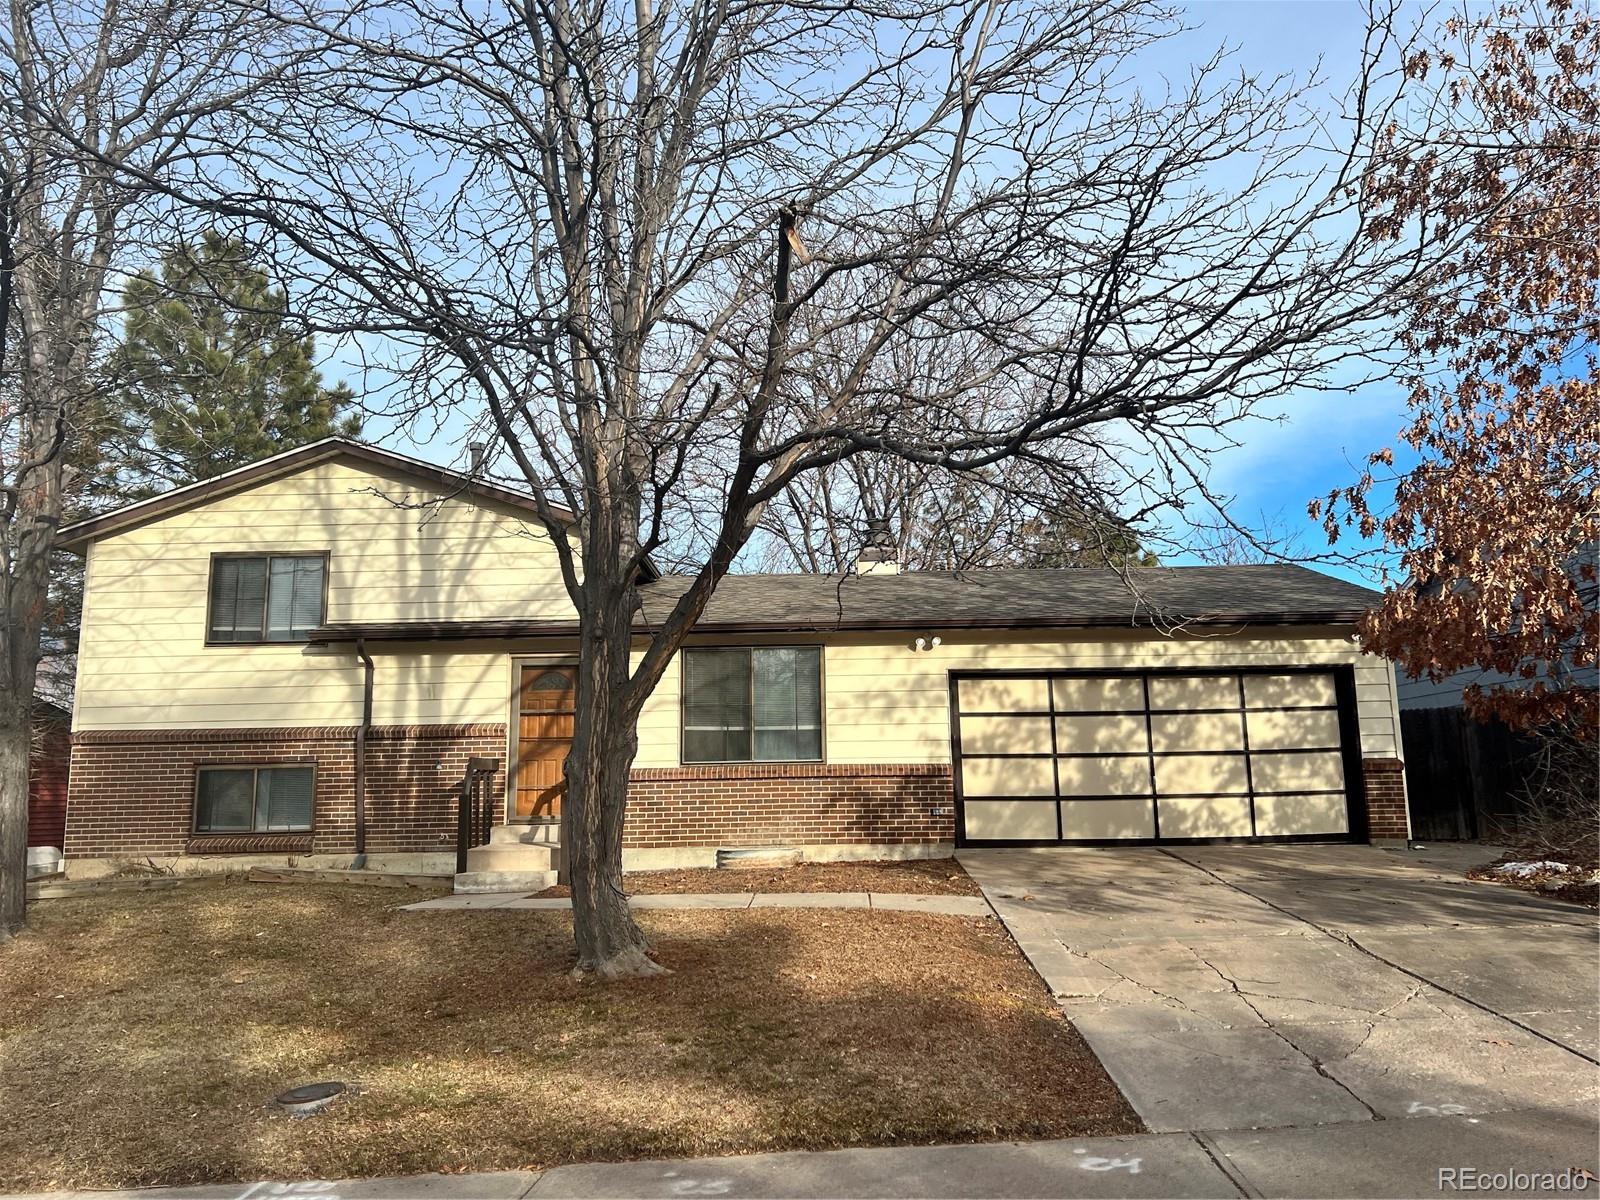 Report Image for 6558 S Garland Way,Littleton, Colorado